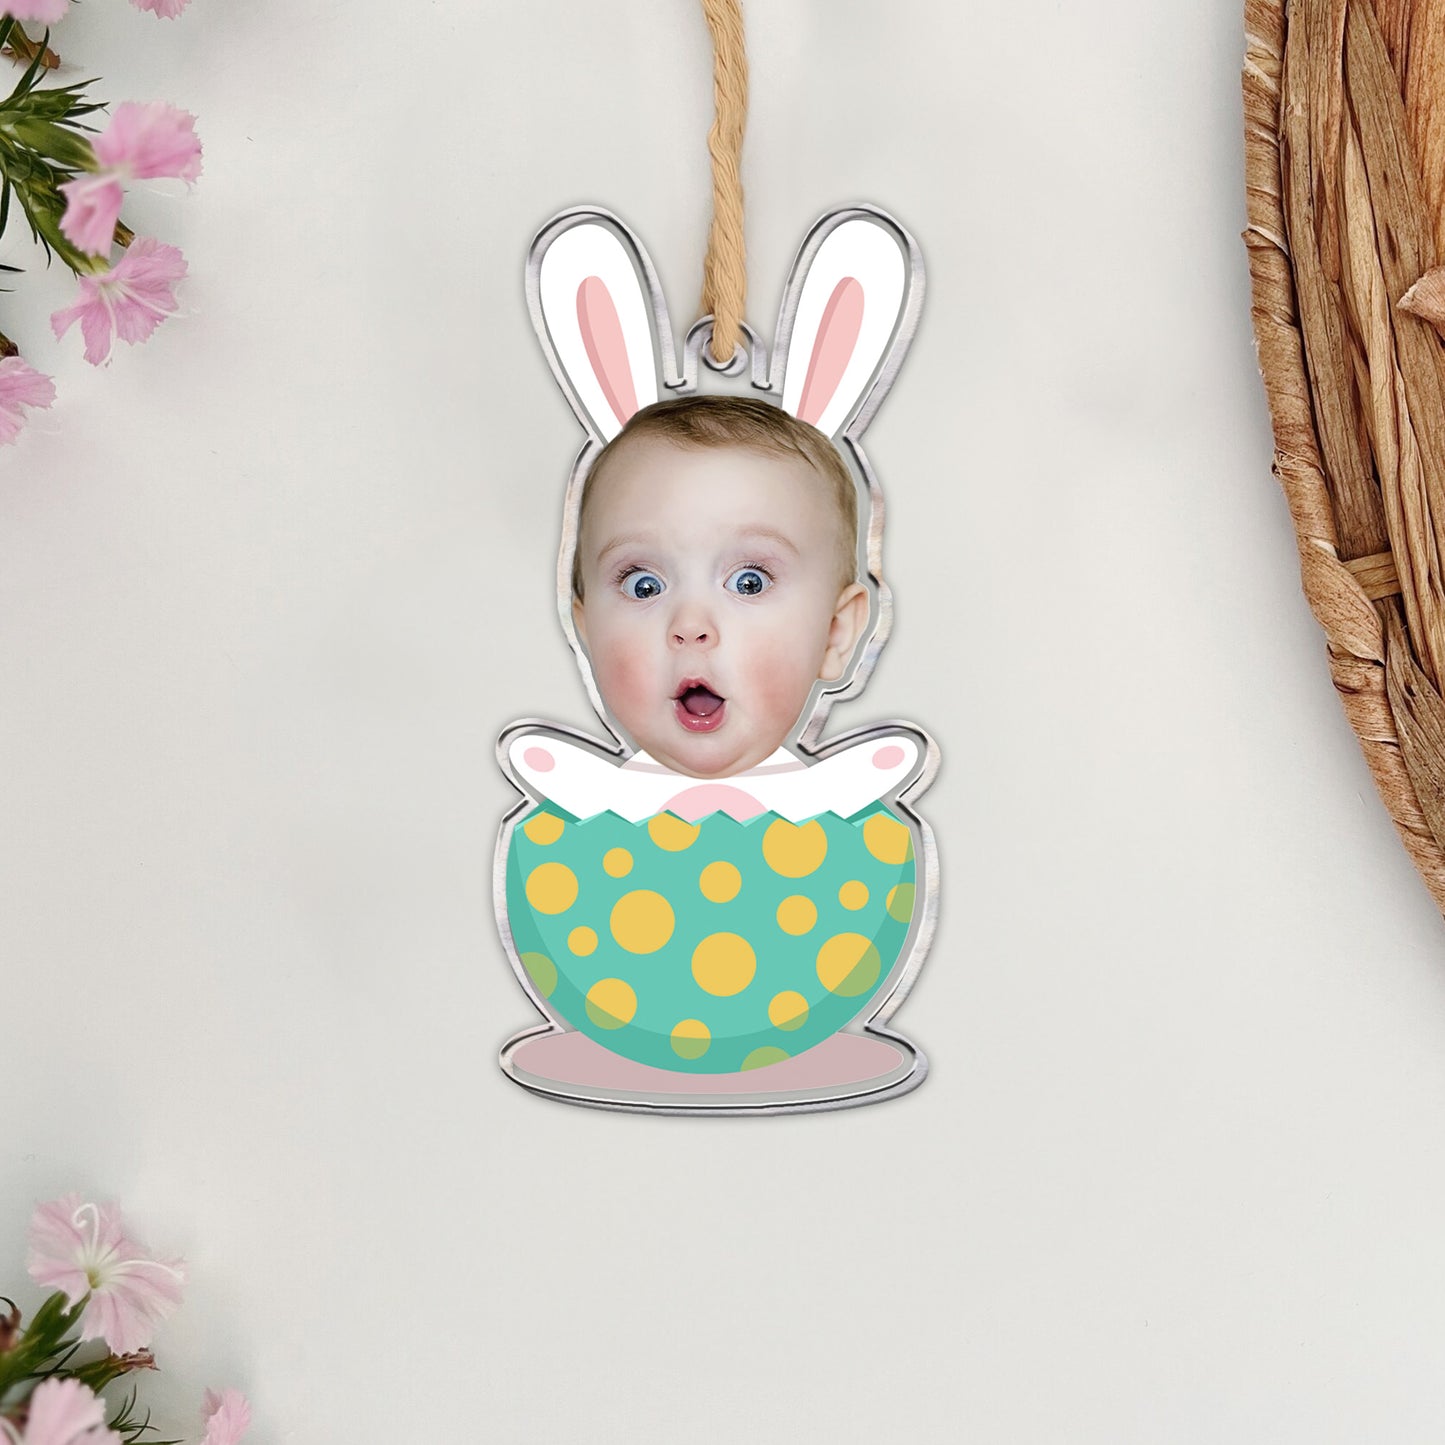 Adorable Kid Wear An Easter Bunny Costume - Personalized Photo Easter Ornament